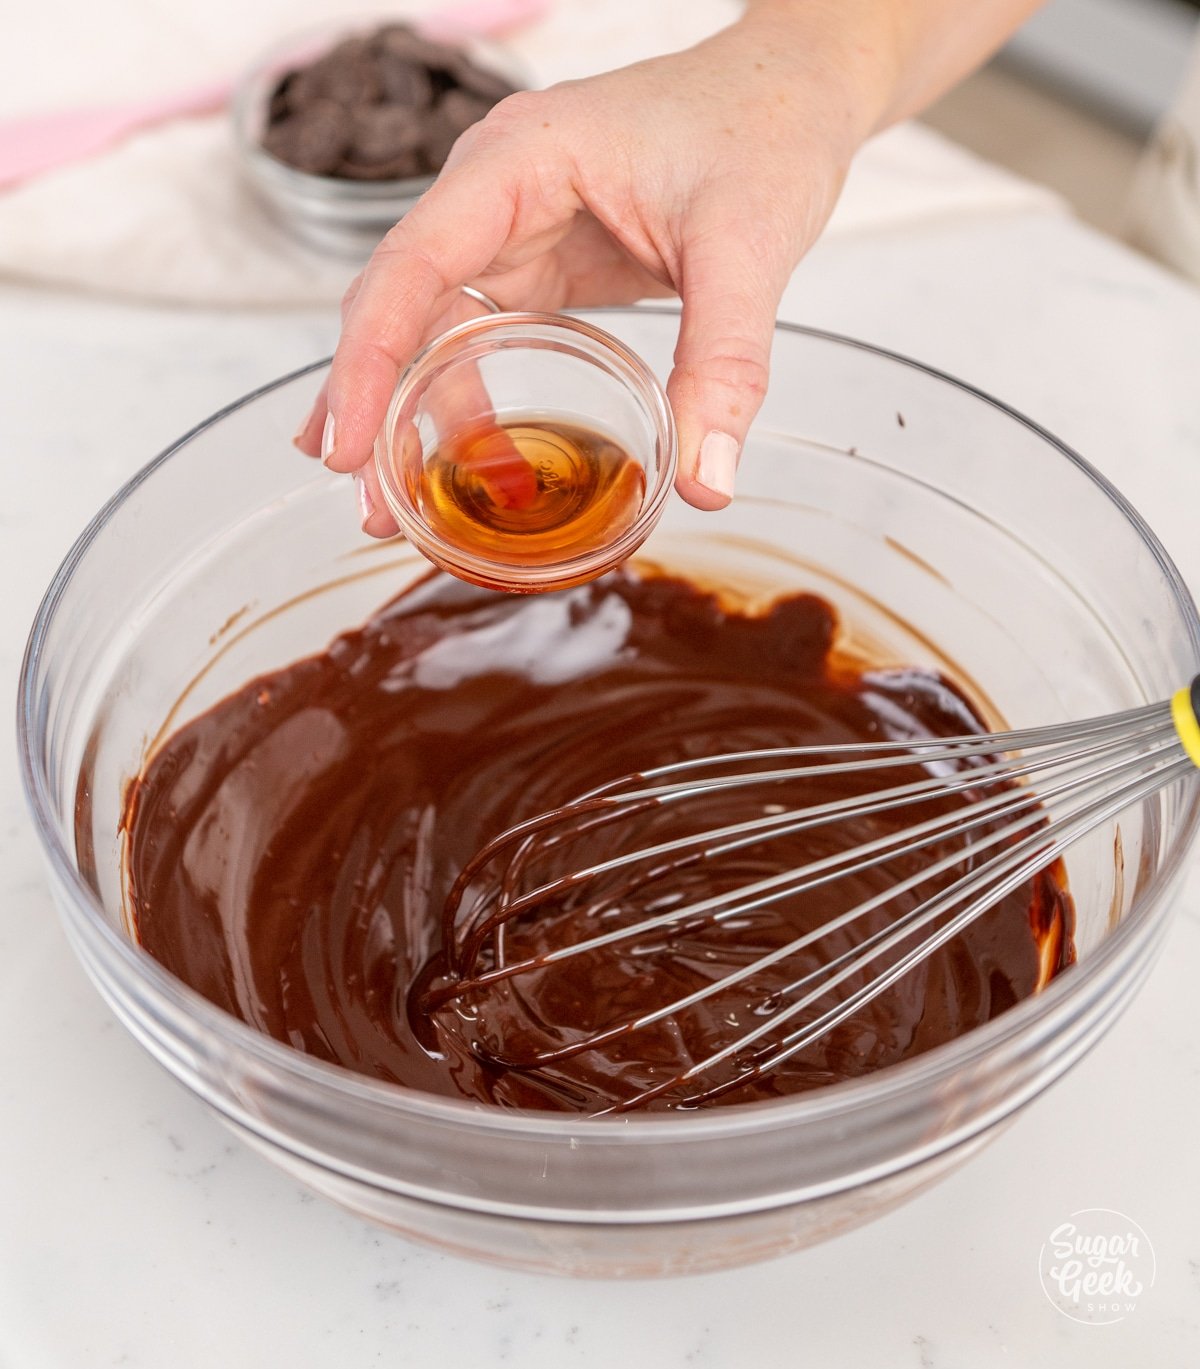 hand adding liquor into a bowl of melted chocolate